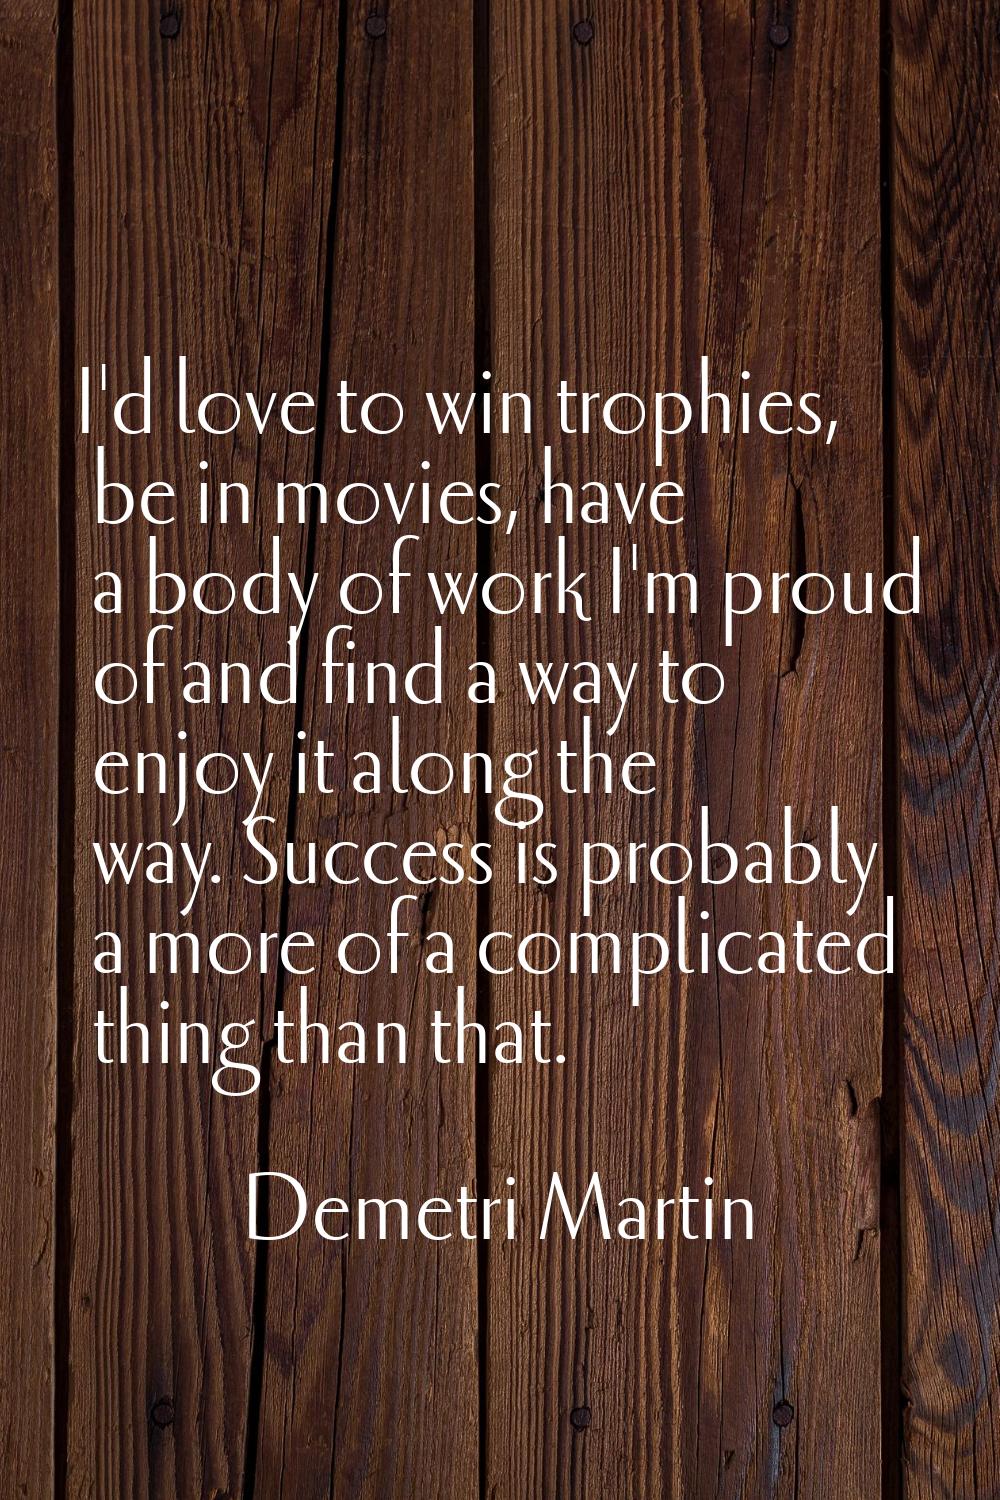 I'd love to win trophies, be in movies, have a body of work I'm proud of and find a way to enjoy it